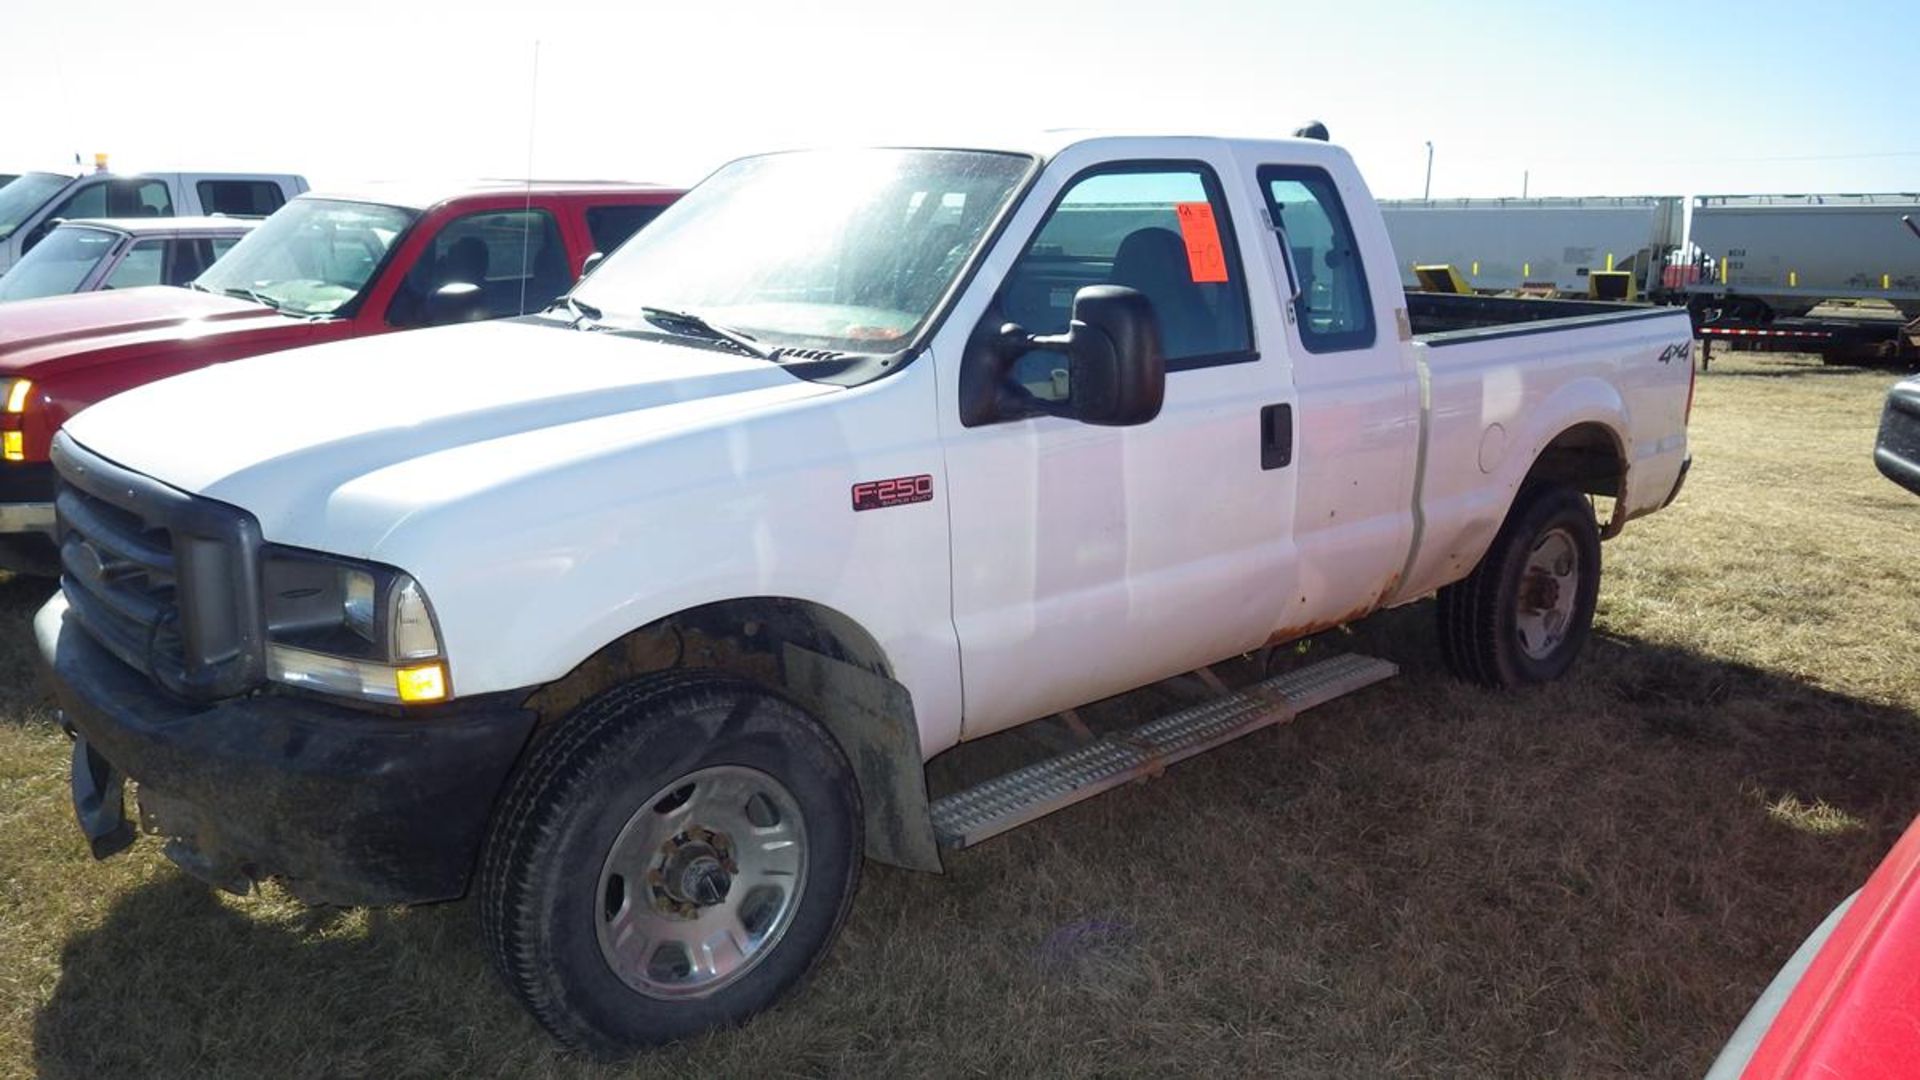 2004 Ford F250 Ext Cab long box 4 x 4 5.4L v8 auto showing 417,273 kms Vin# 1FTNX21L74EC67165 and - Image 2 of 9